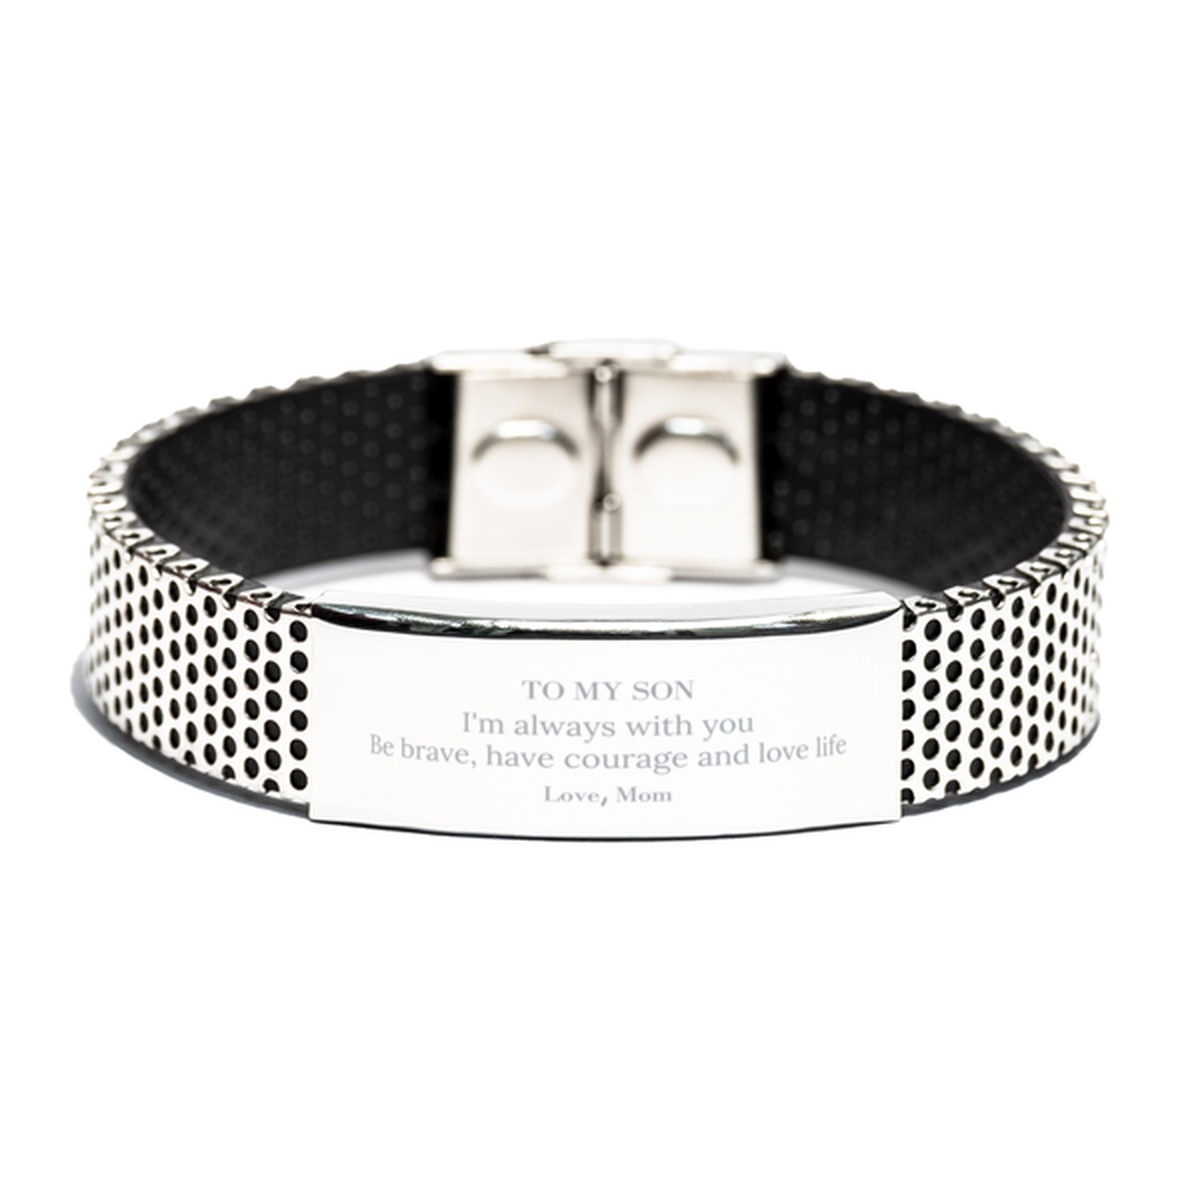 To My Son Gifts from Mom, Unique Stainless Steel Bracelet Inspirational Christmas Birthday Graduation Gifts for Son I'm always with you. Be brave, have courage and love life. Love, Mom